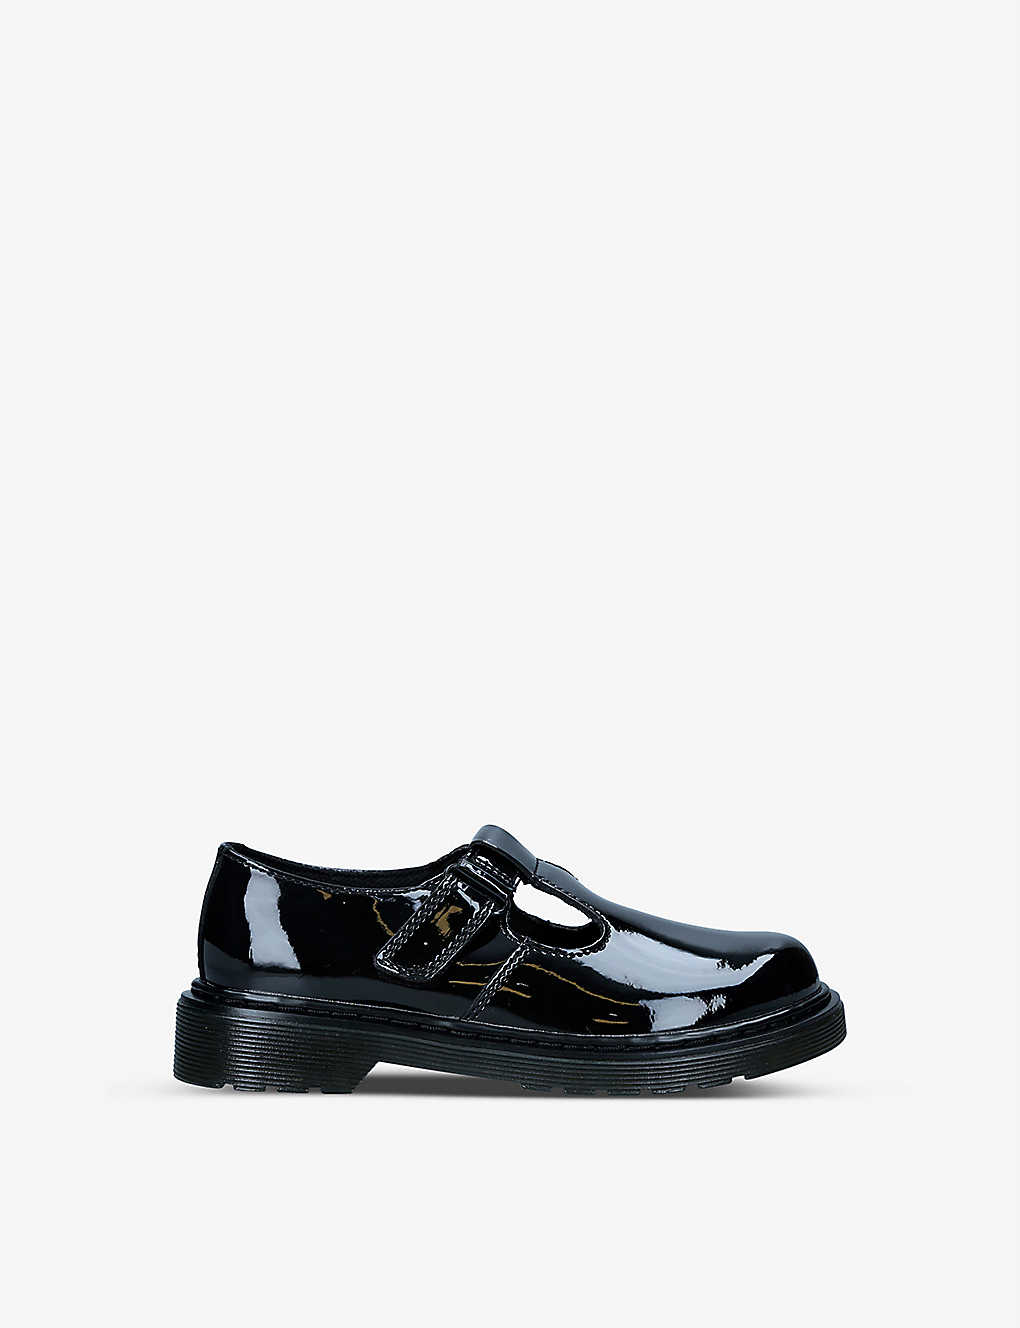 Dr. Martens' Kids' Ailis Patent Leather Shoes 5-12 Years In Black